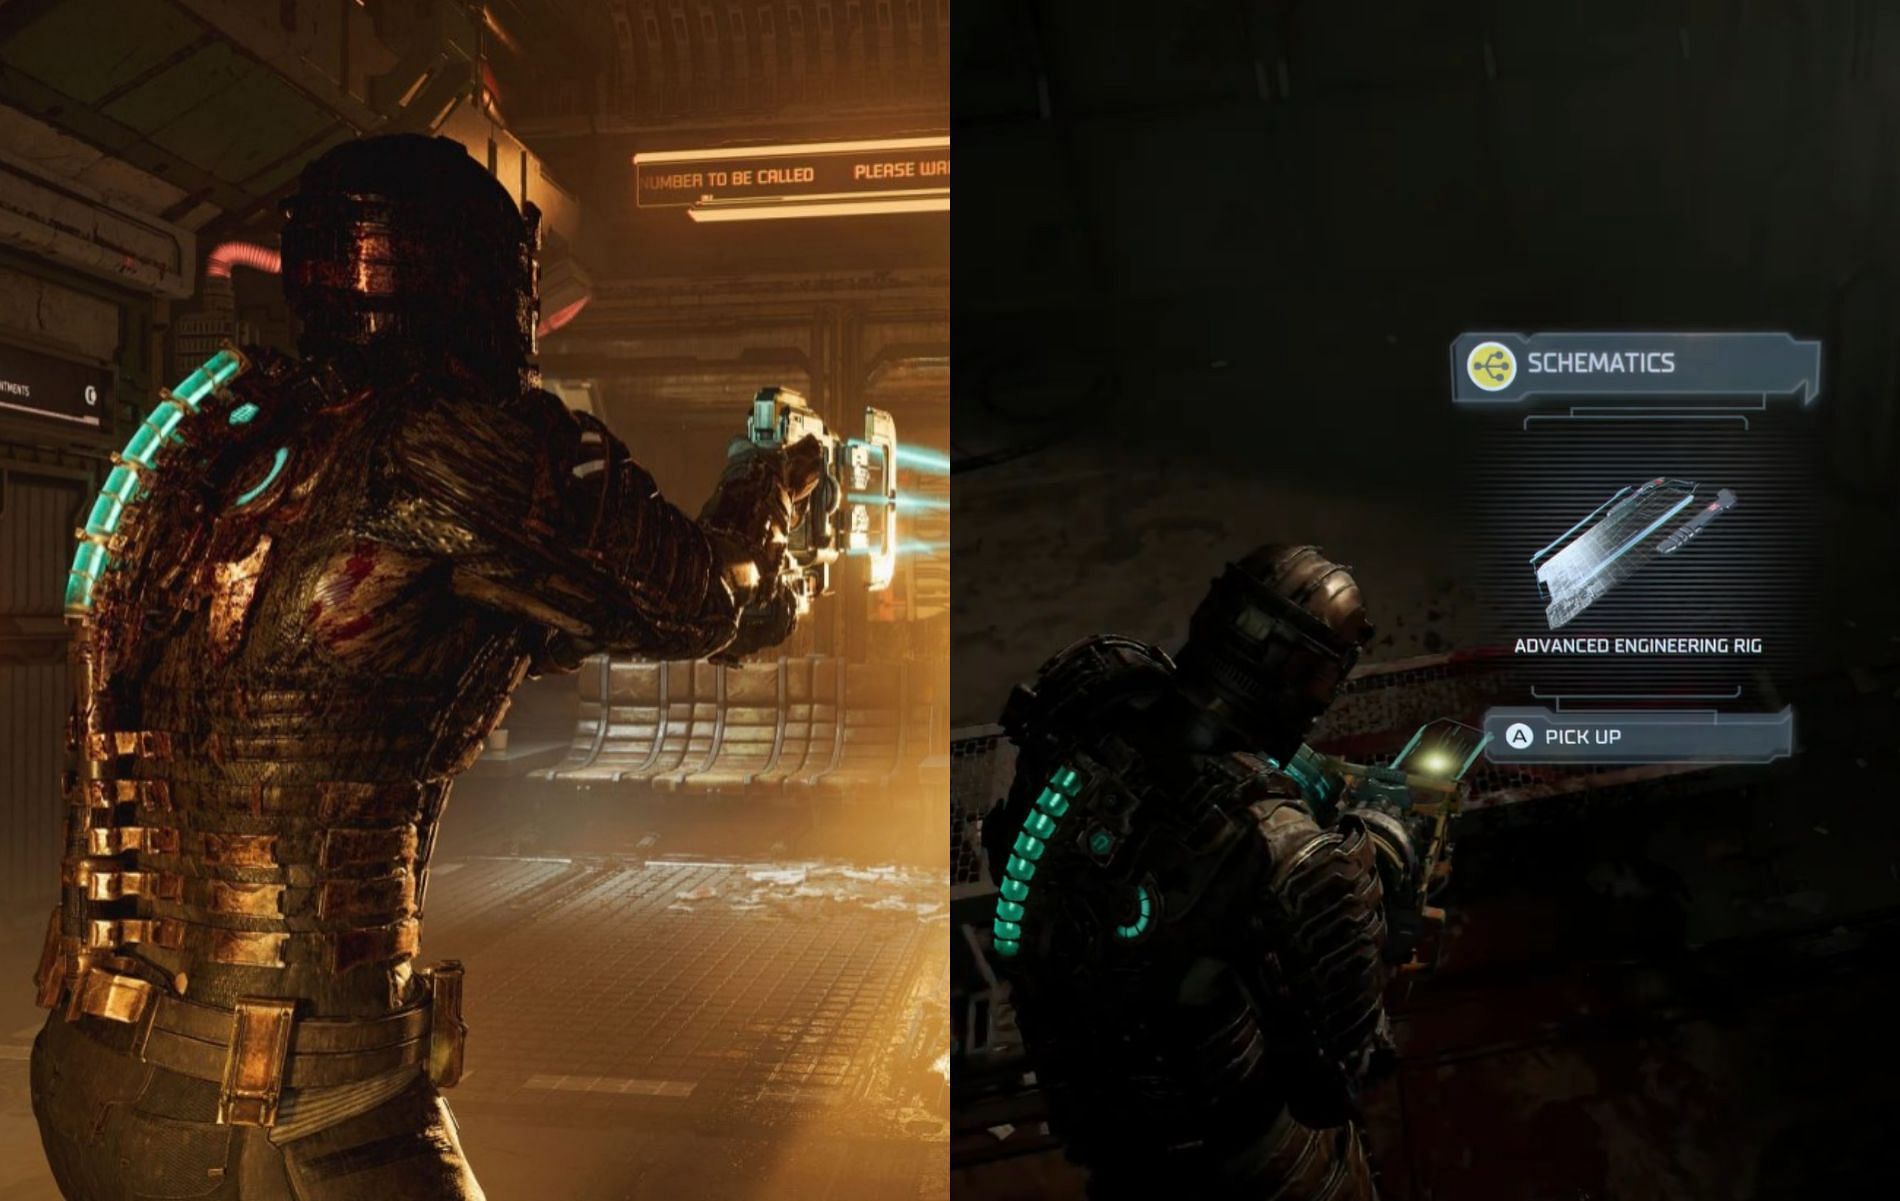 Dead Space suit upgrade locations, including how to get the final